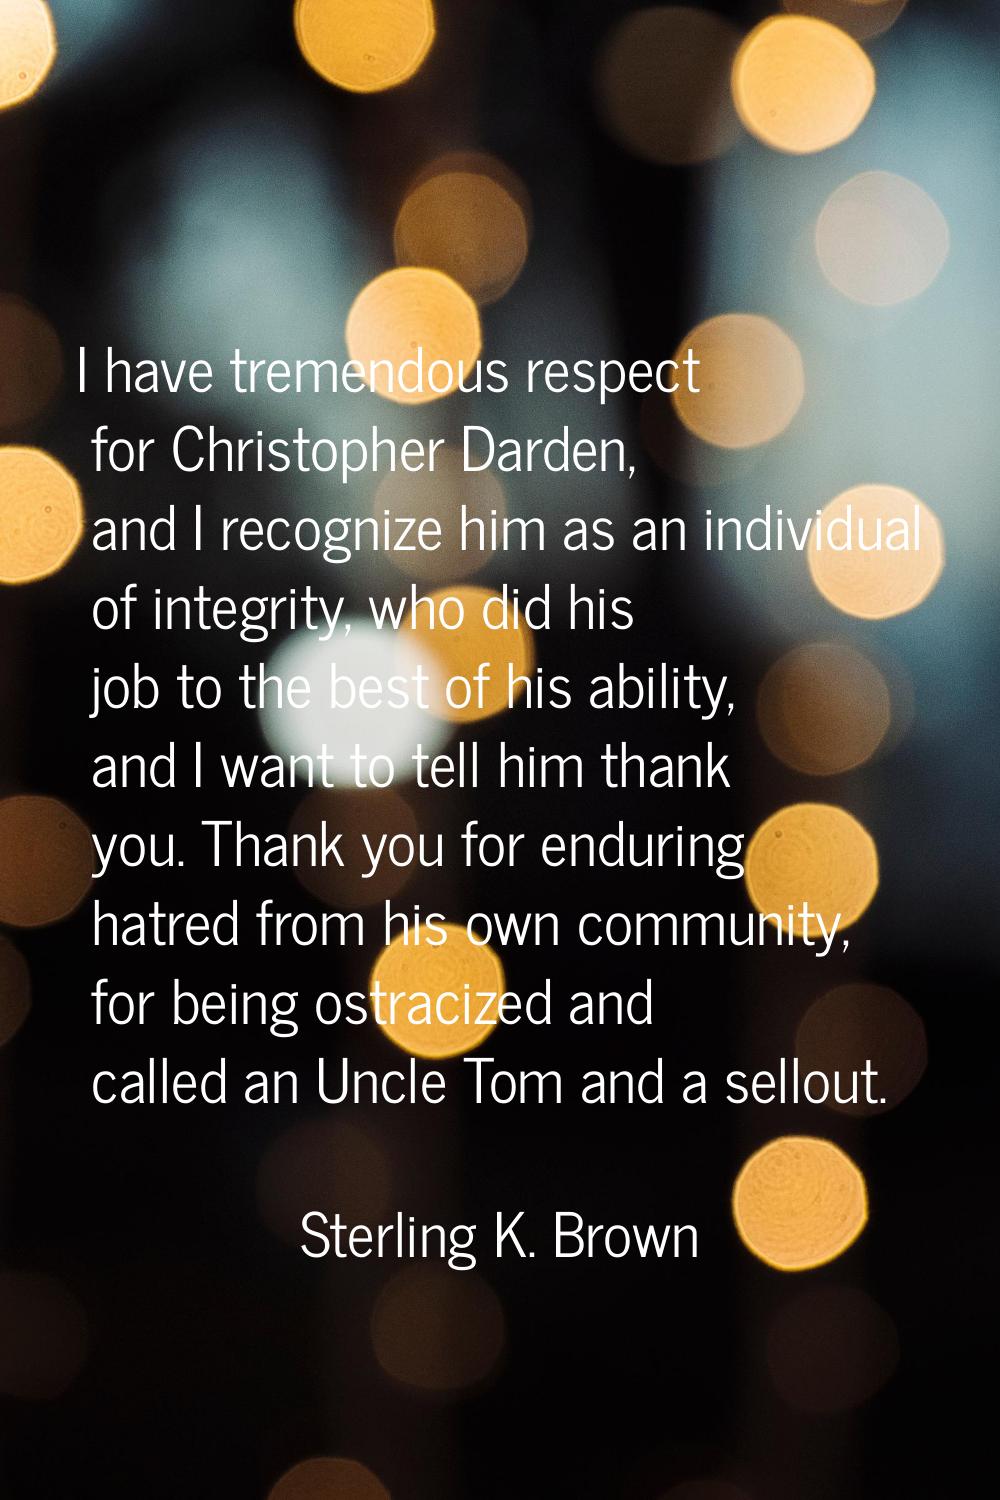 I have tremendous respect for Christopher Darden, and I recognize him as an individual of integrity